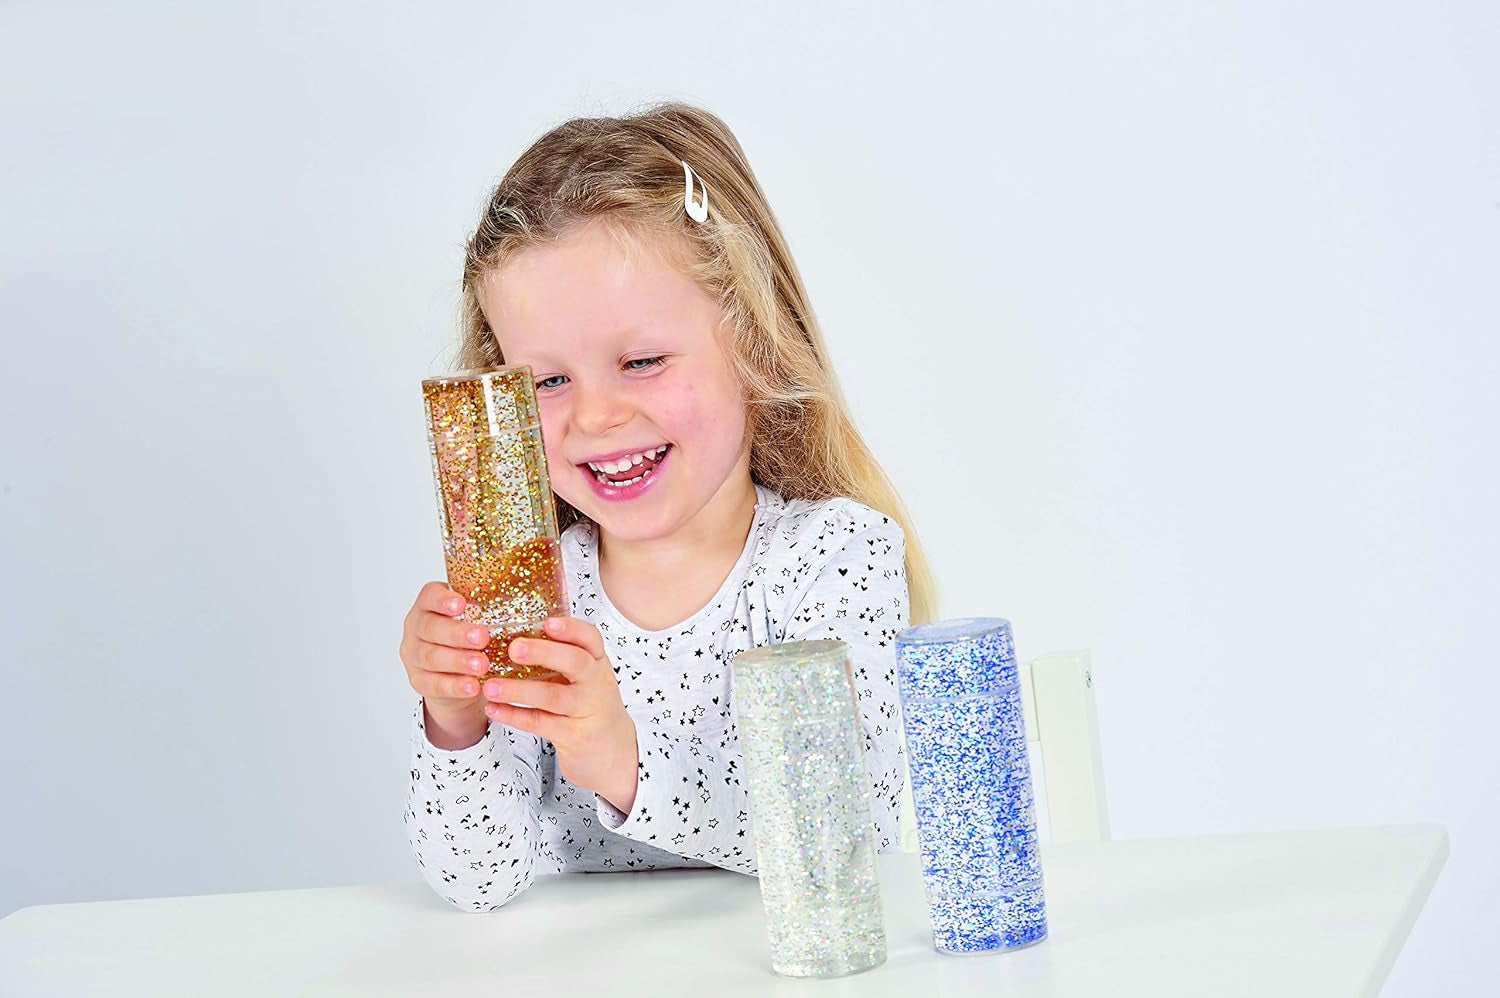 Sensory Glitter Storm - Set of 3 - Blue, Silver, Gold - Calming Glitter Tubes for Stress and Anxiety Relief - Encourage Focus and Concentration - Special Needs Toy